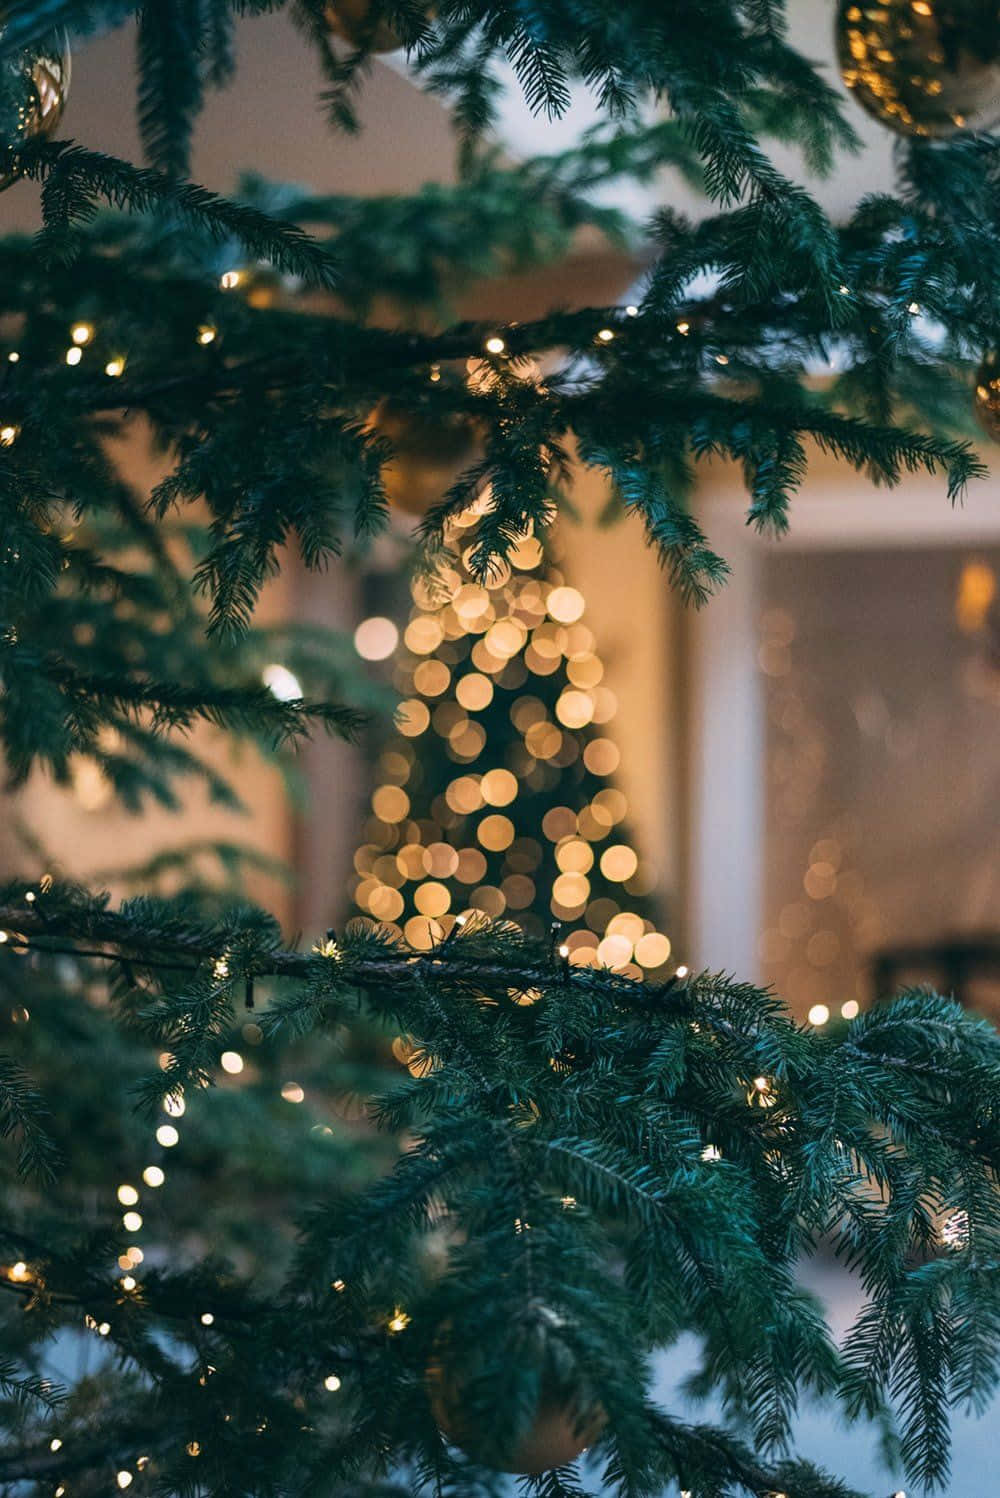 Capture the Magic of Christmas with this Dreamy Phone Background